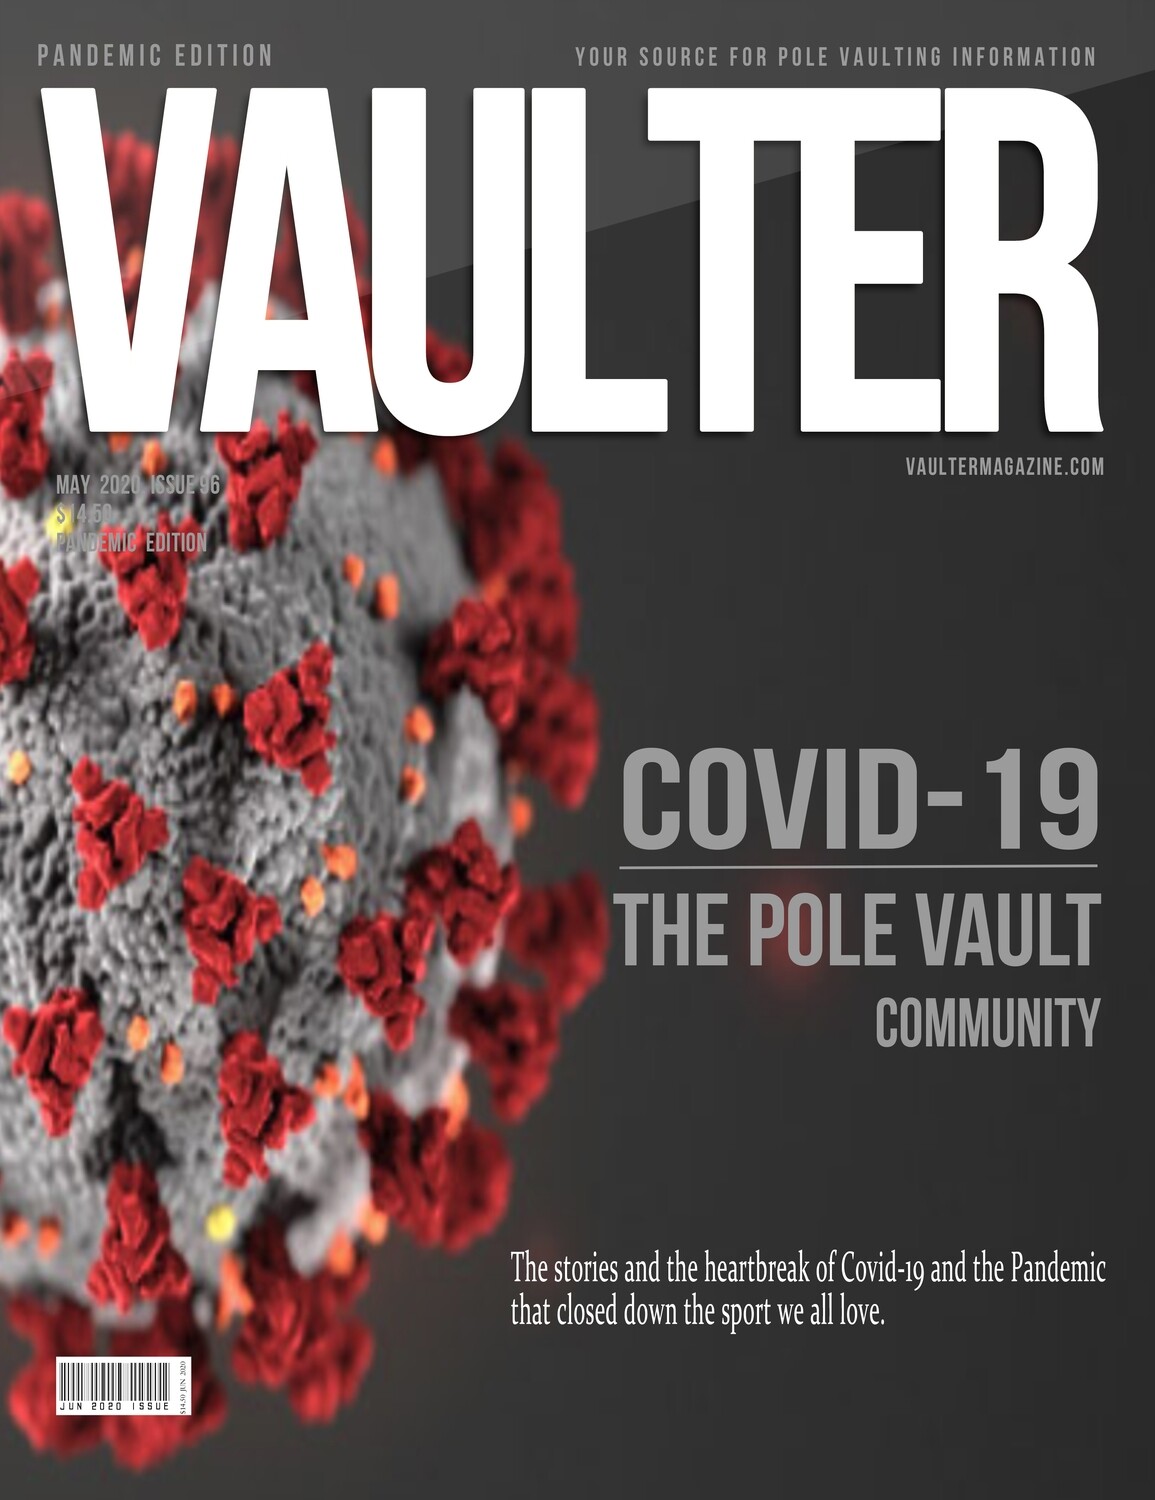 May 2020 Covid - 19 Issue of Vaulter Magazine  U.S. Standard Mail